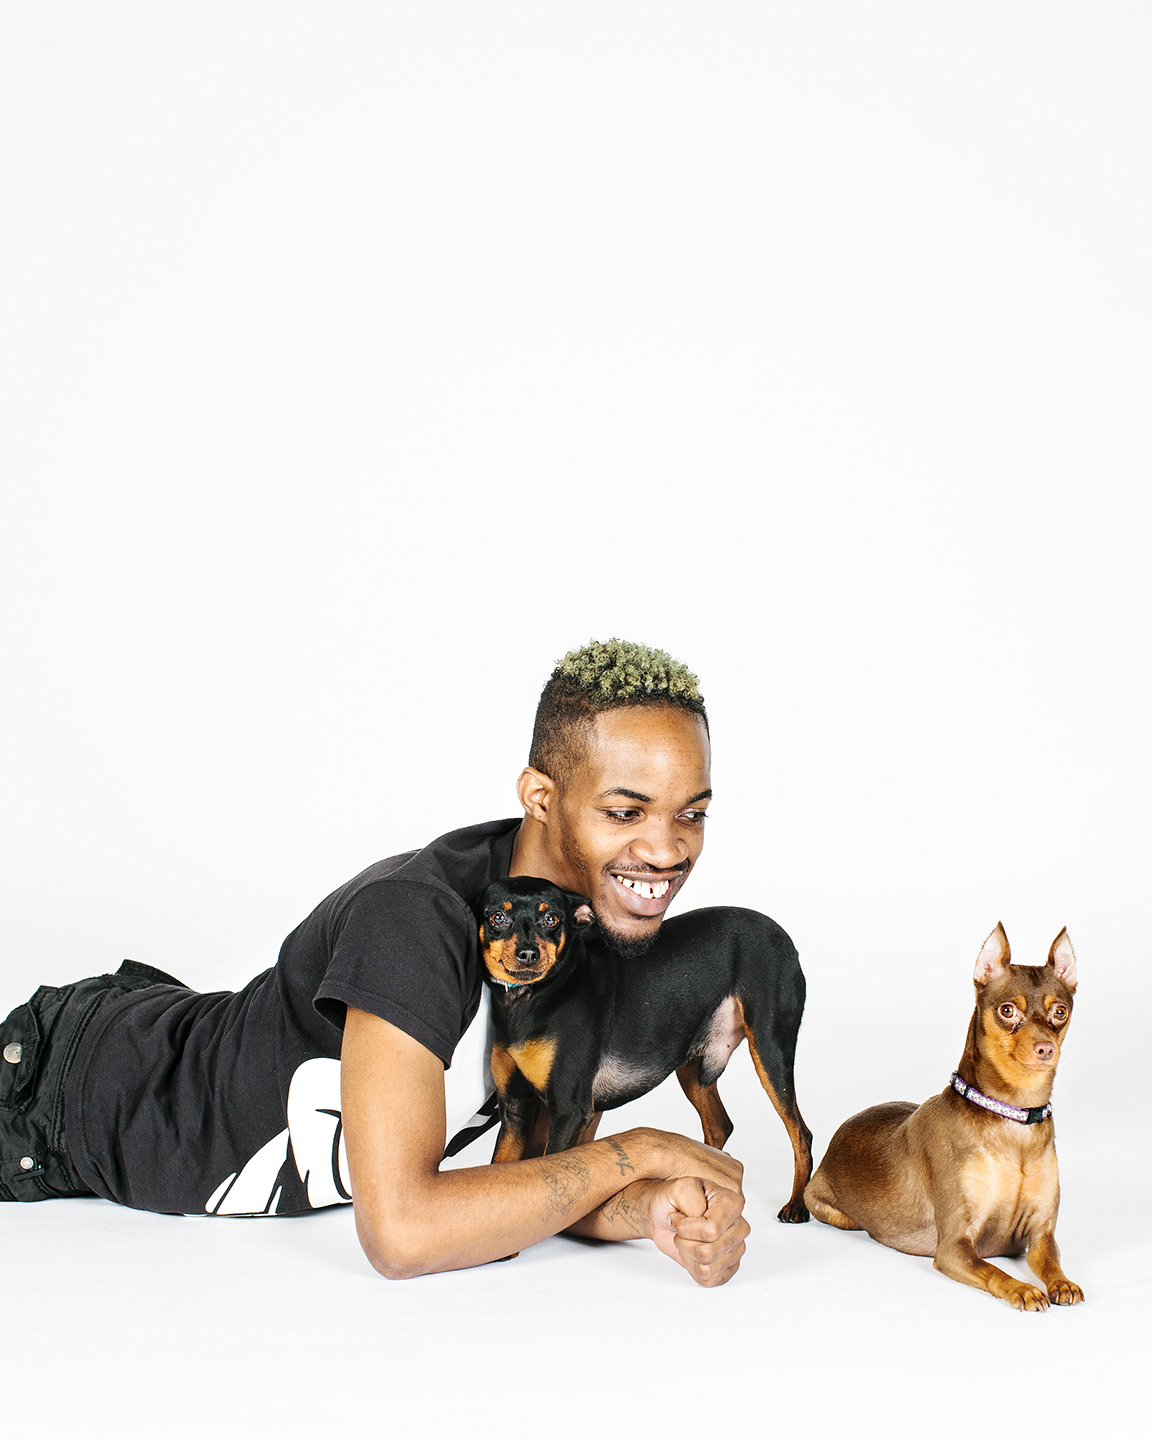 Tremaine and his dogs Rockee Balboa and Madam Russia